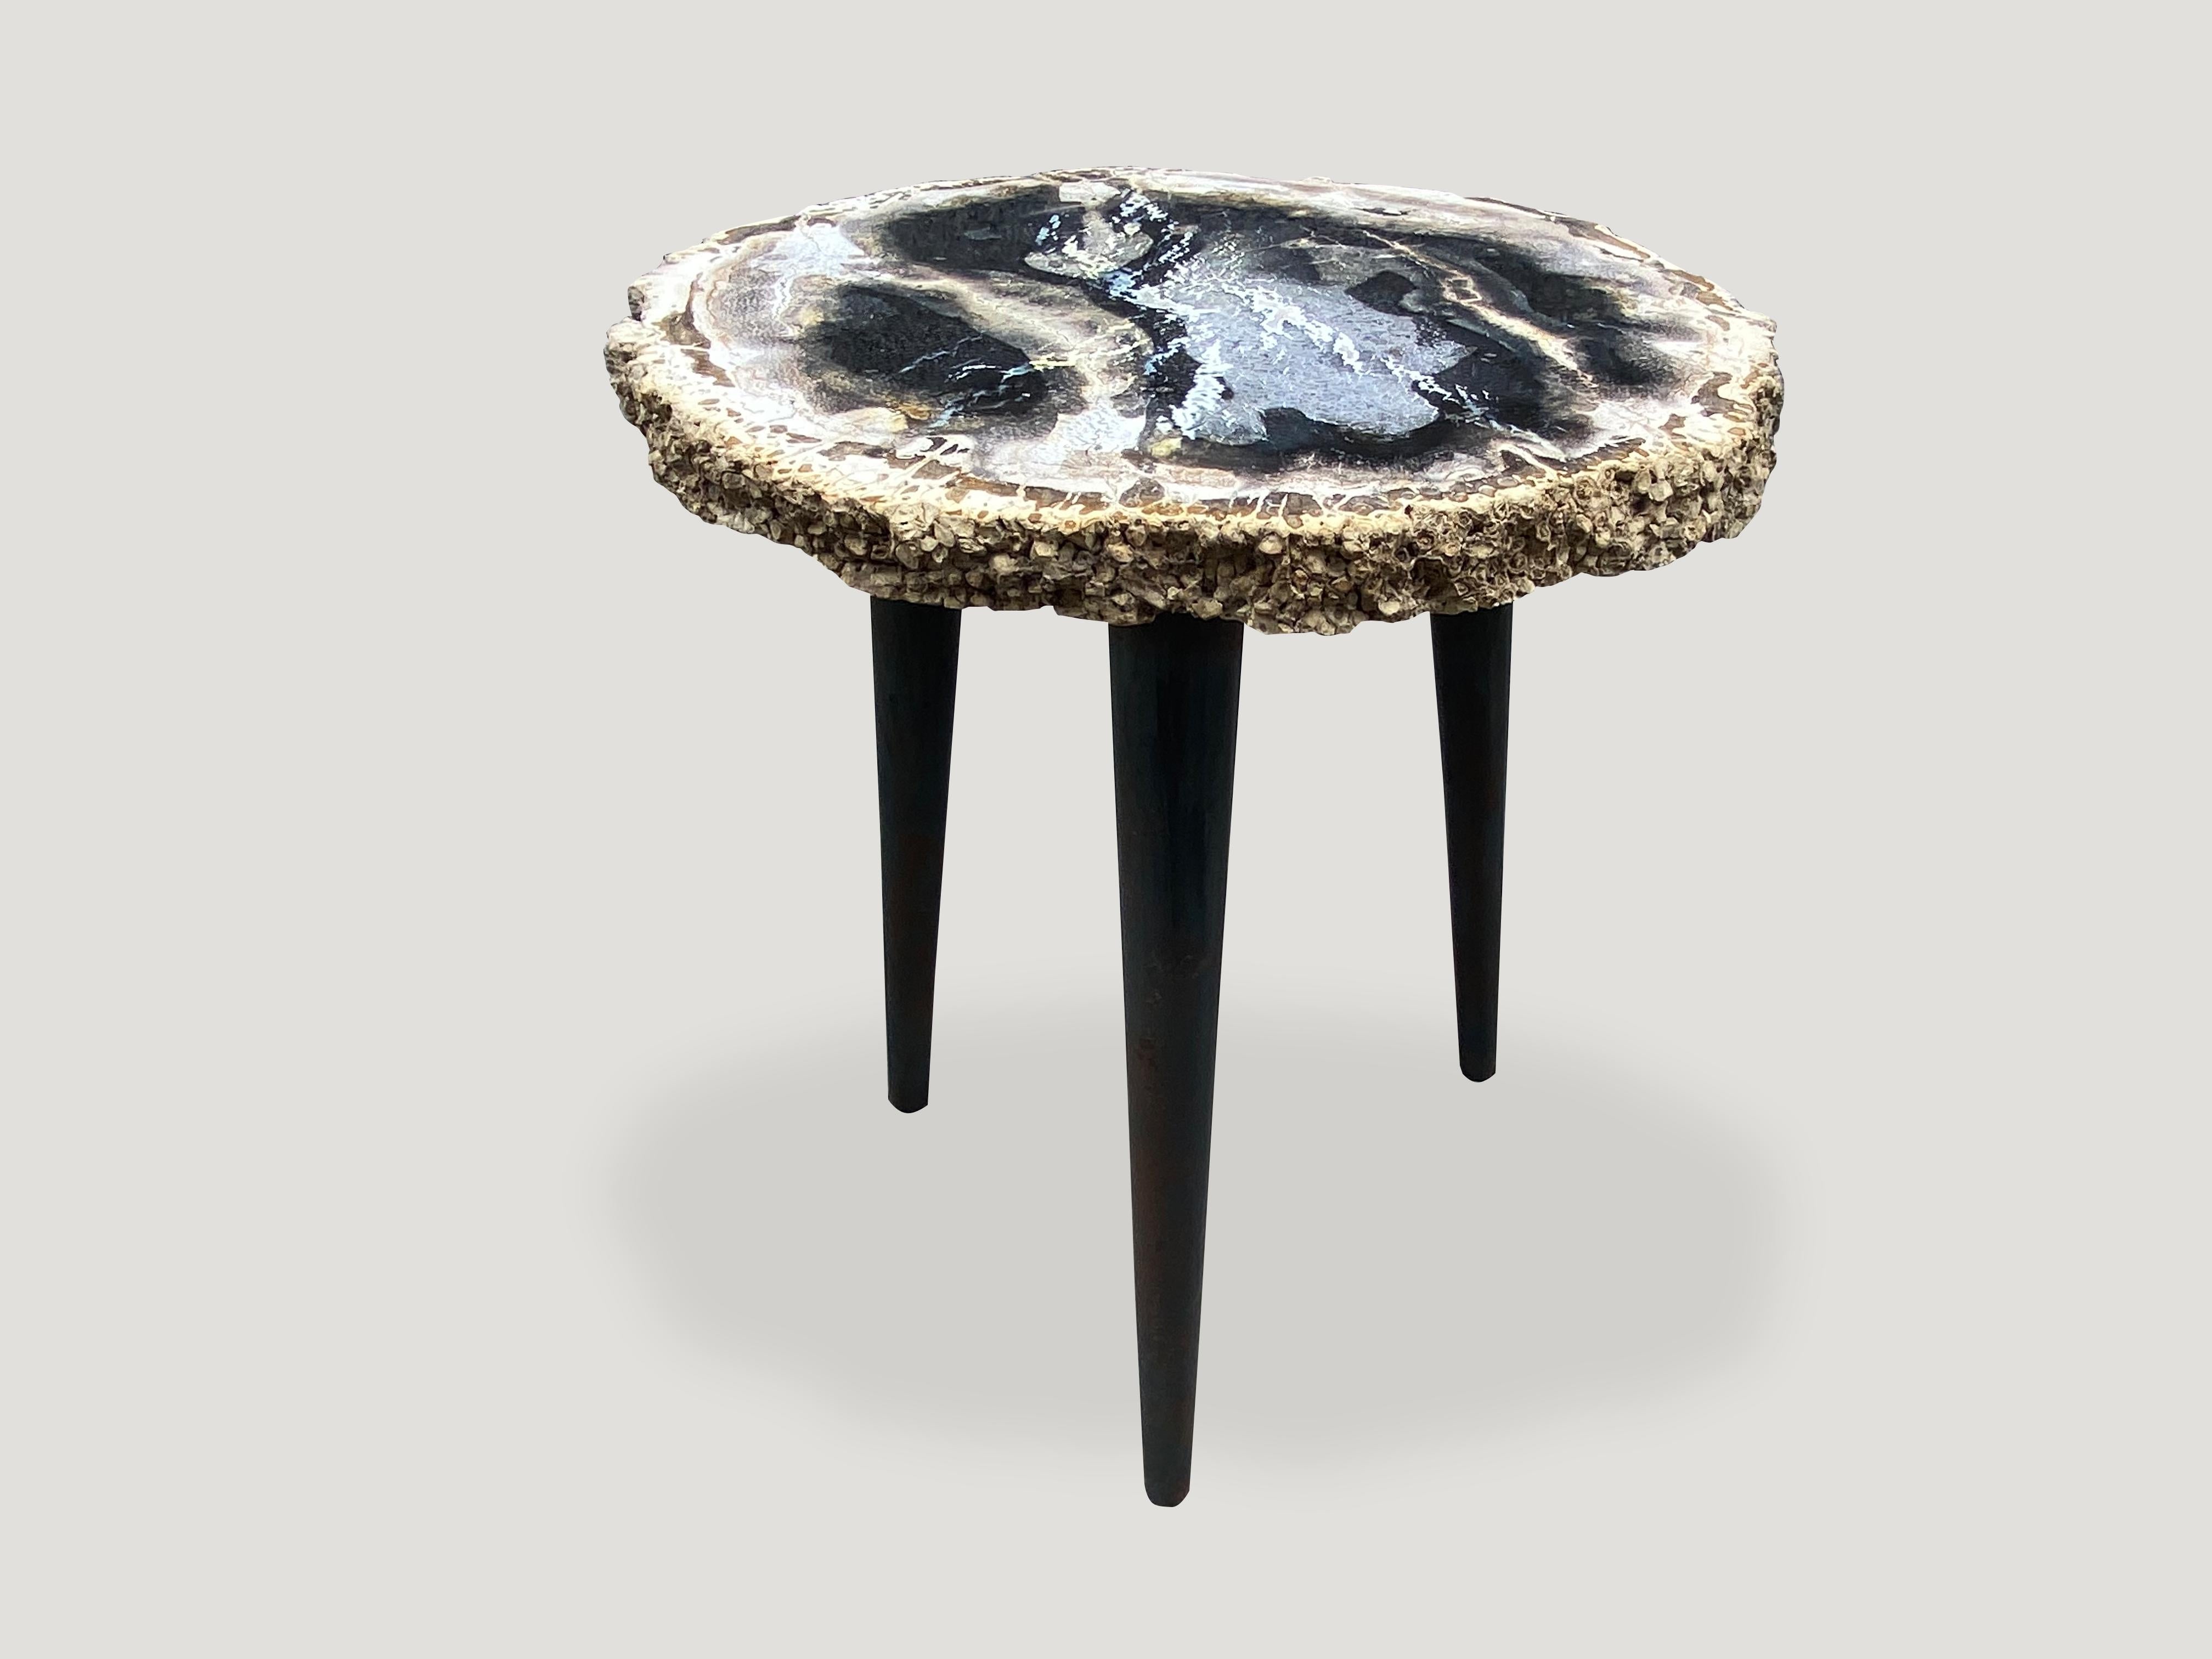 Beautiful contrasting colors on this stunning palm petrified wood slab top side table. Rare grey, blue and white palm top is resting on a mid century style metal base. 

It’s fascinating how Mother Nature produces these stunning 40 million year